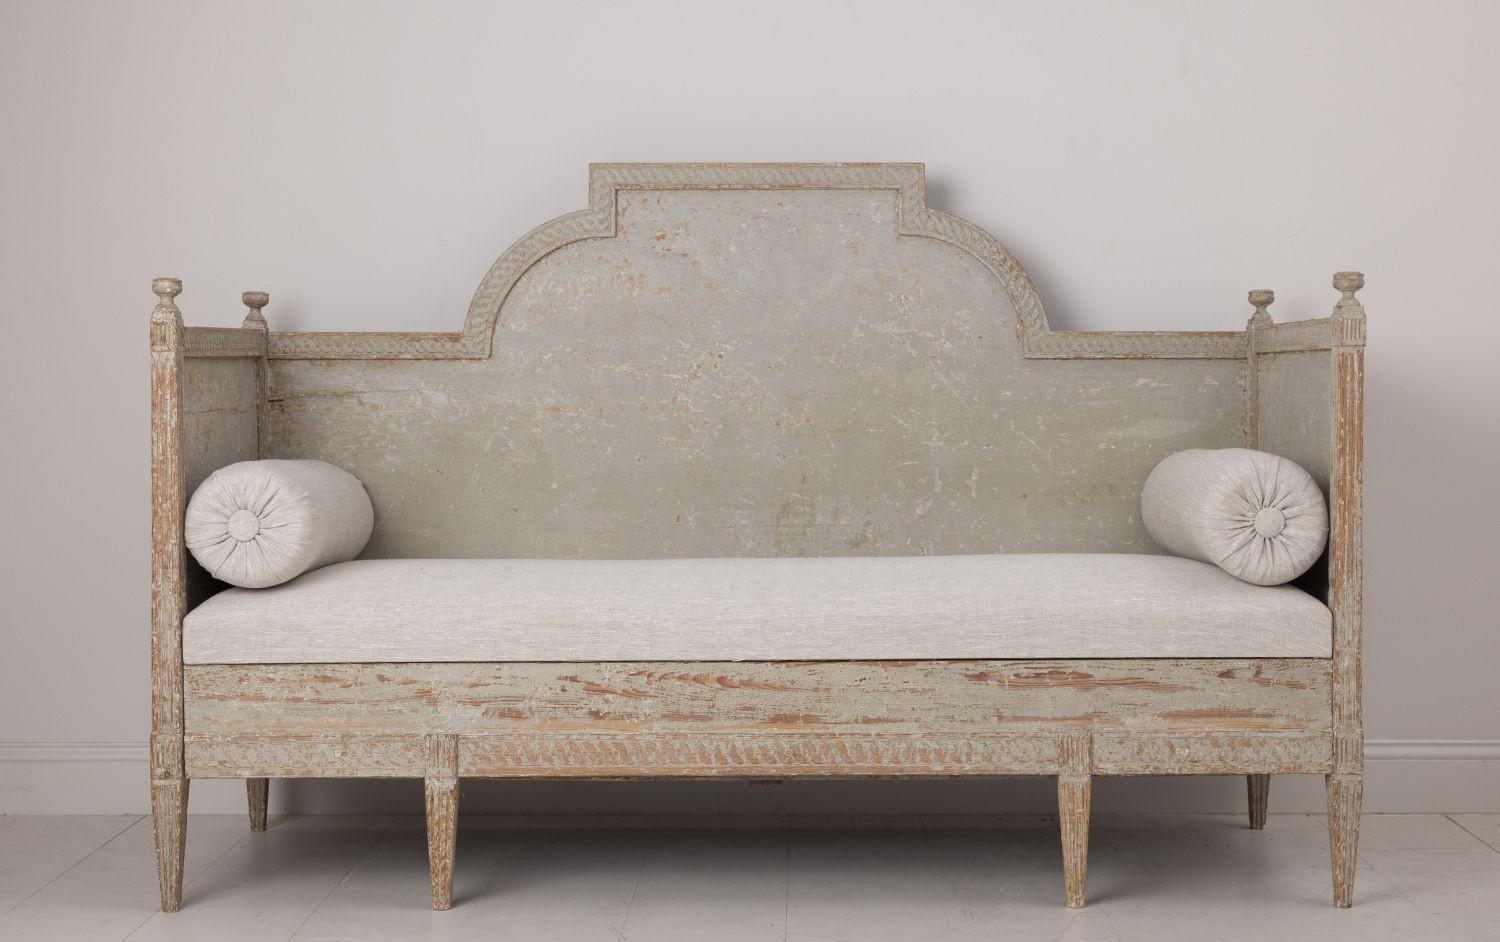 Hand-Carved Swedish Upholstered Sofa in Original Paint, 18th c. Gustavian Period